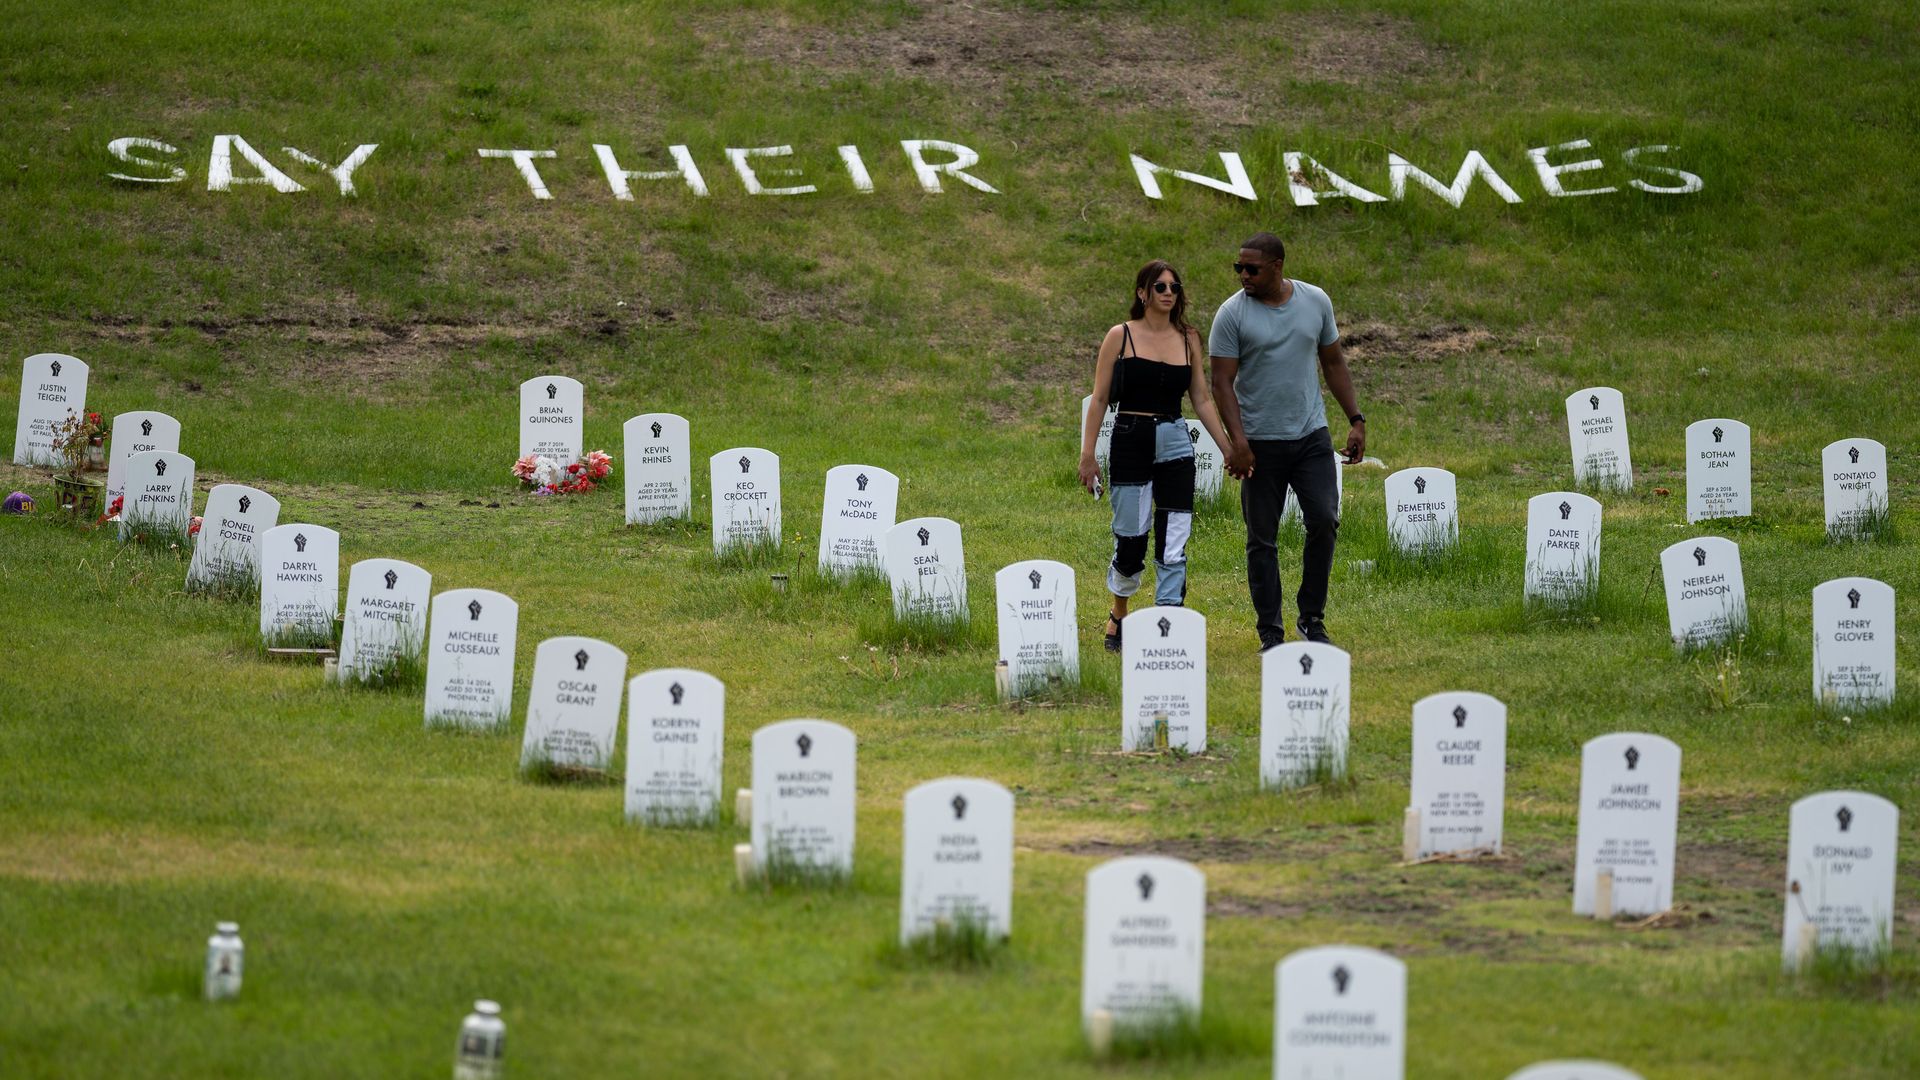 People visit Say Their Names cemetery near George Floyd Square, on Saturday, May 22, 2021 in Minneapolis, MN. (Kent Nishimura / Los Angeles Times via Getty Images)